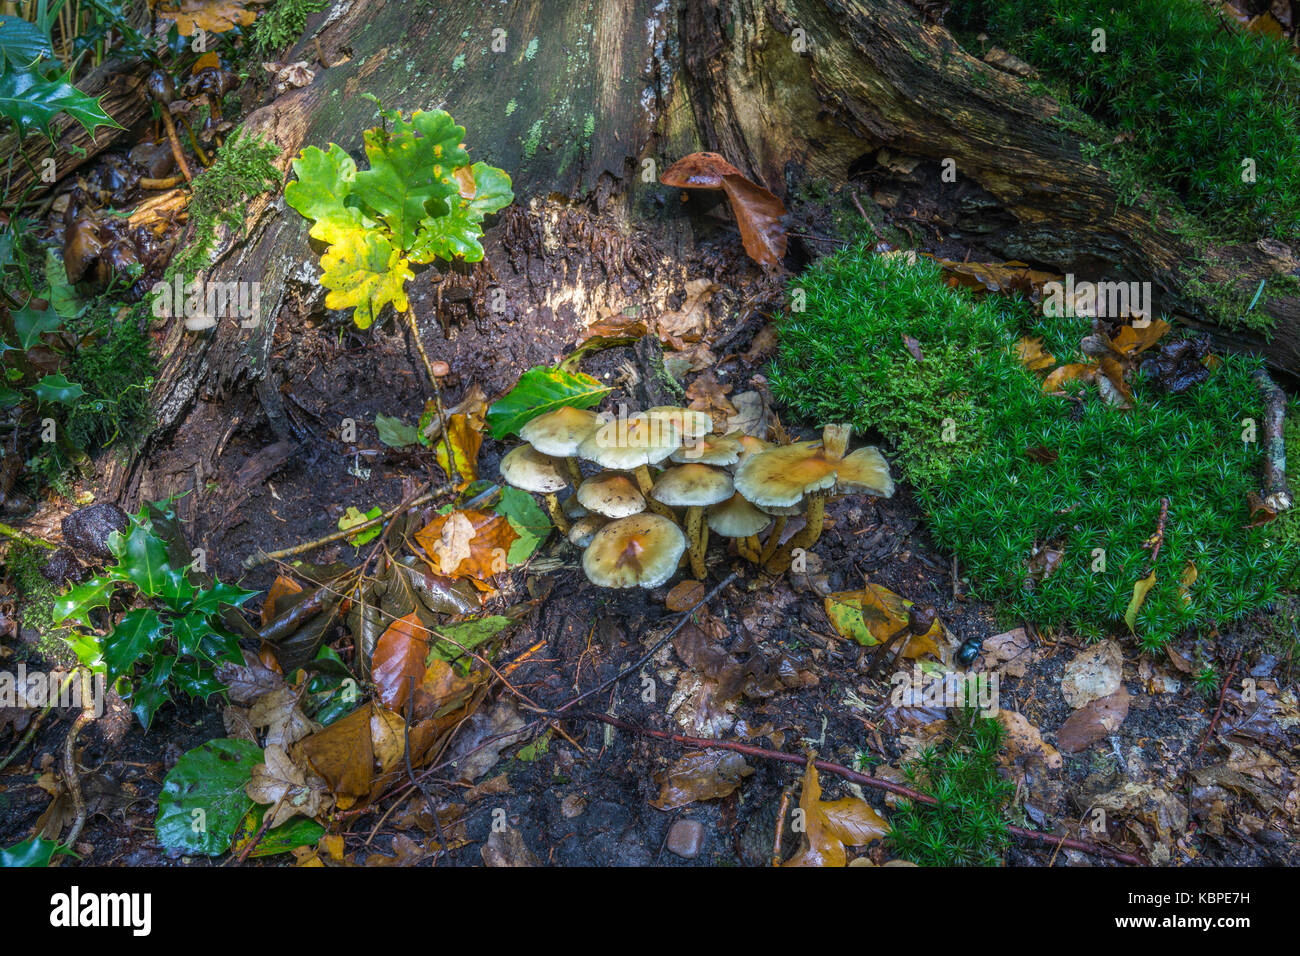 A close up of mushrooms on a tree in a forest Stock Photo